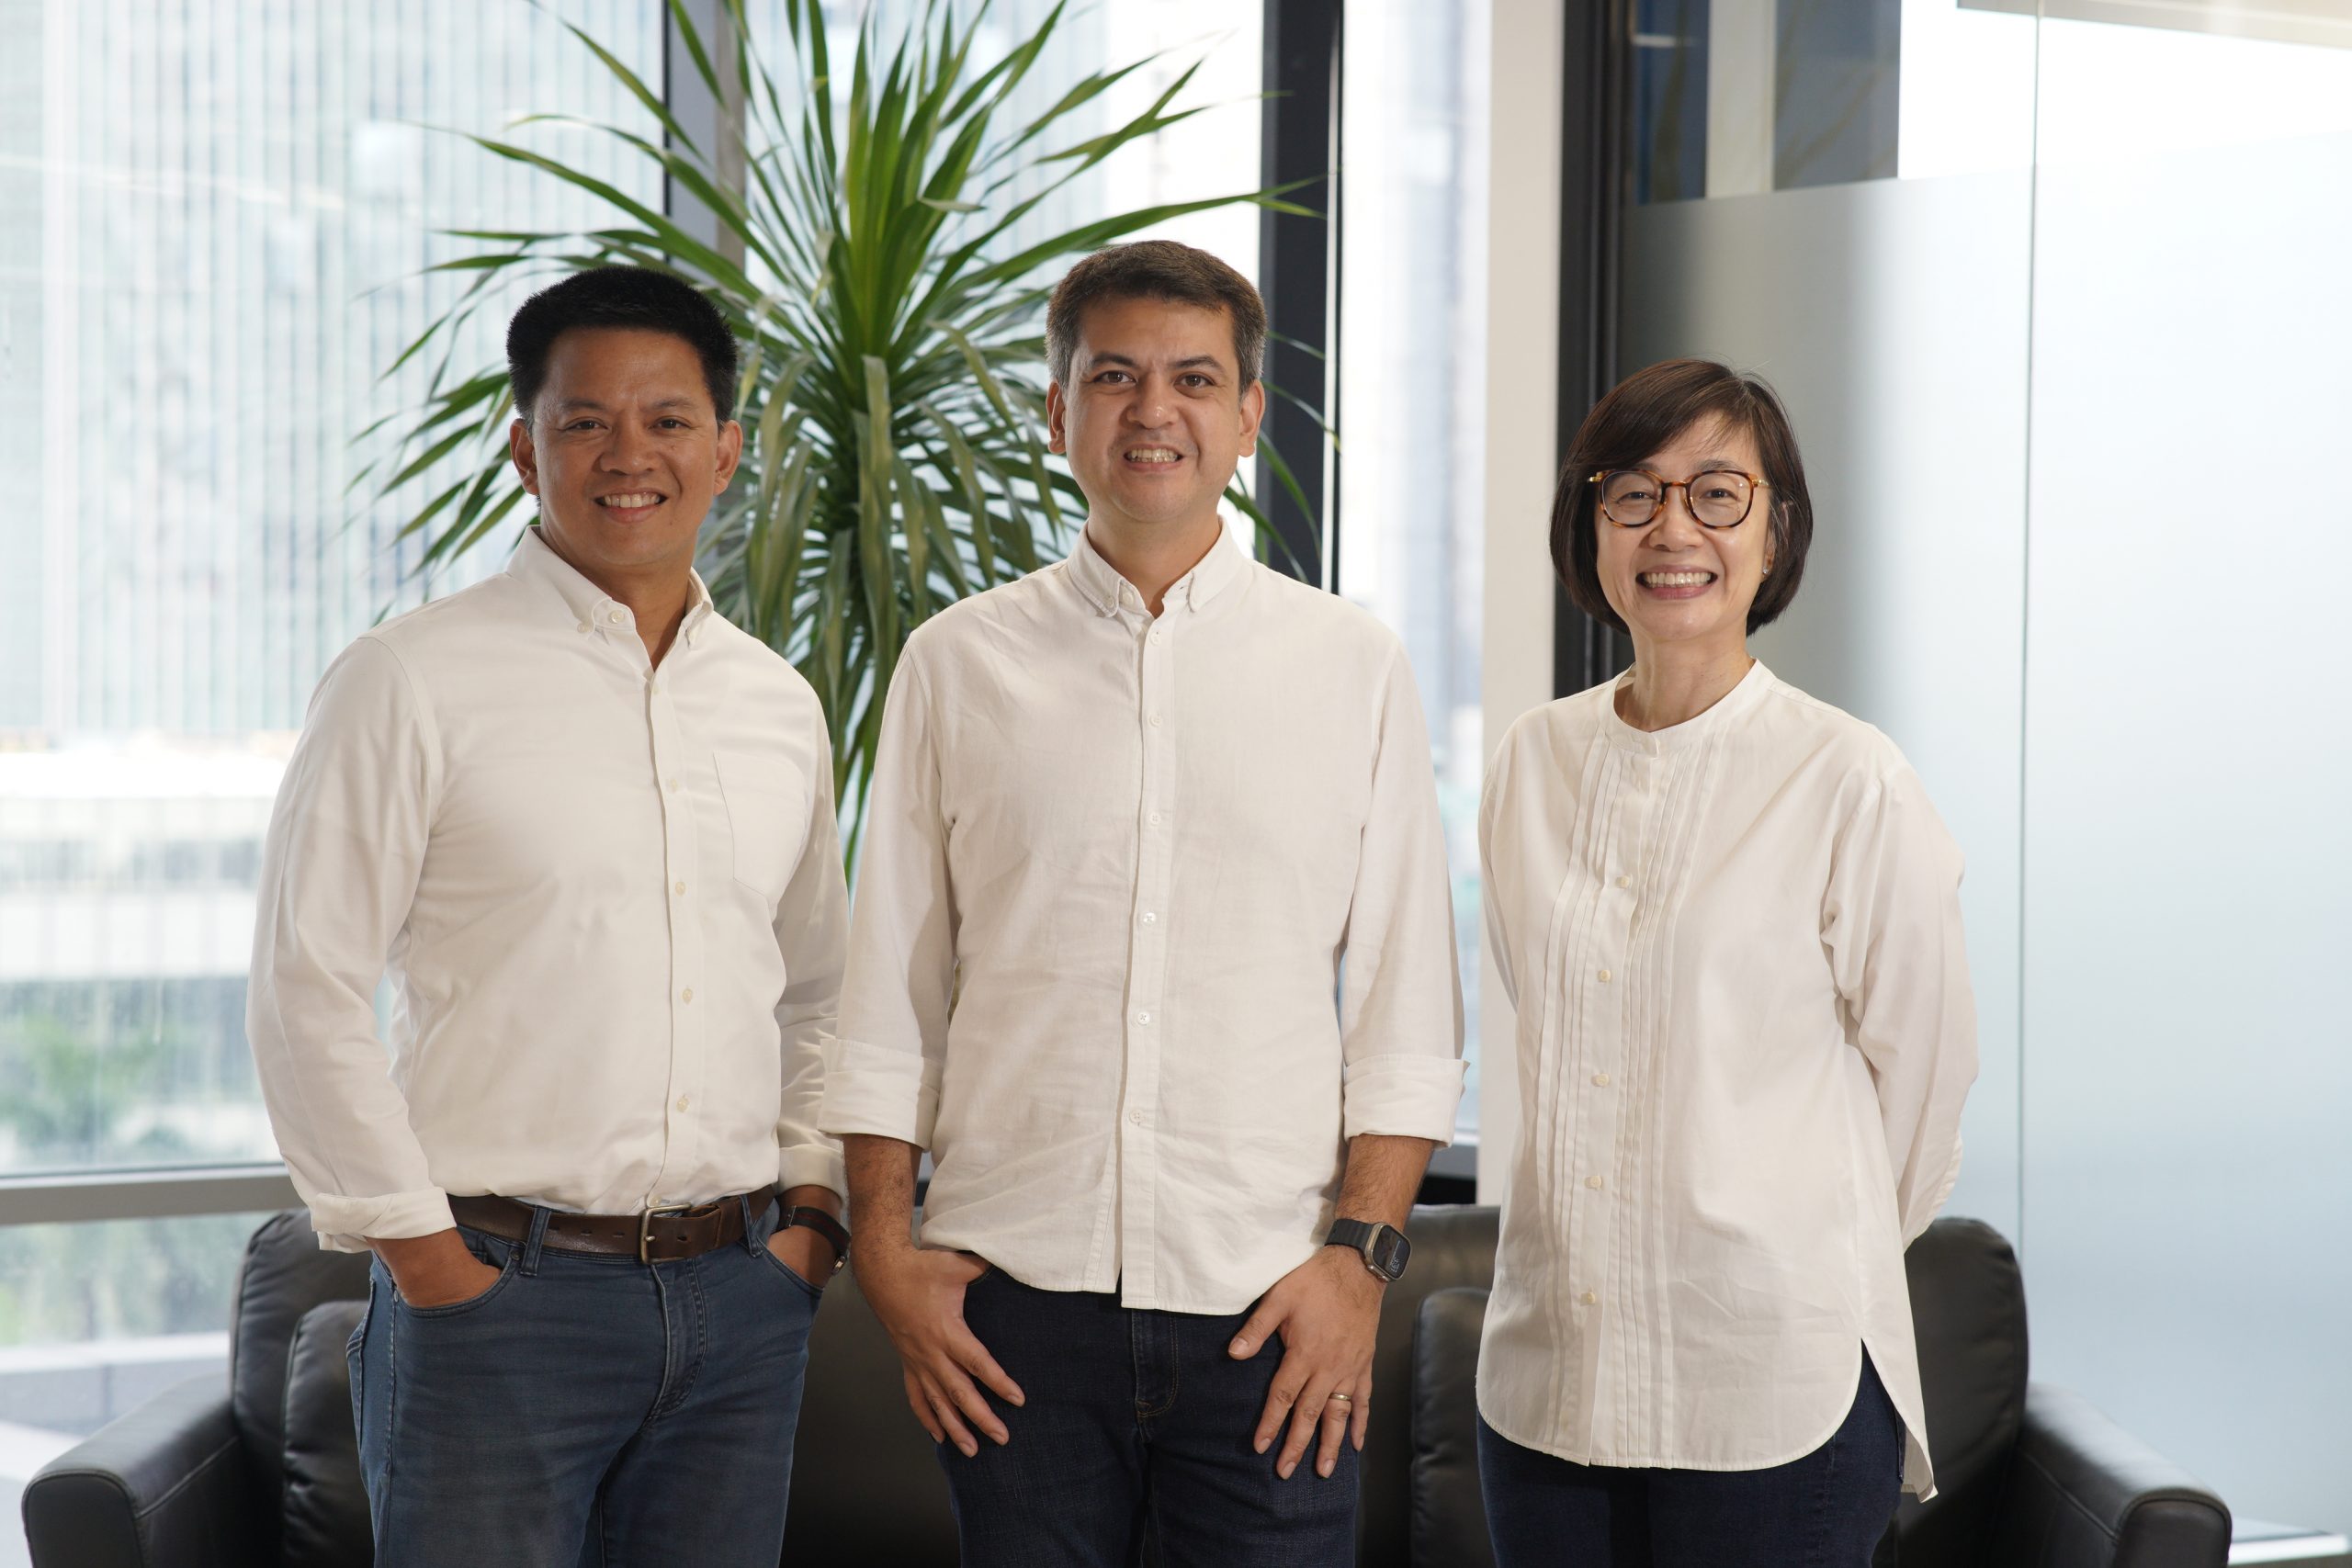 Kaya Founders hits 2nd close of latest funds at $18m